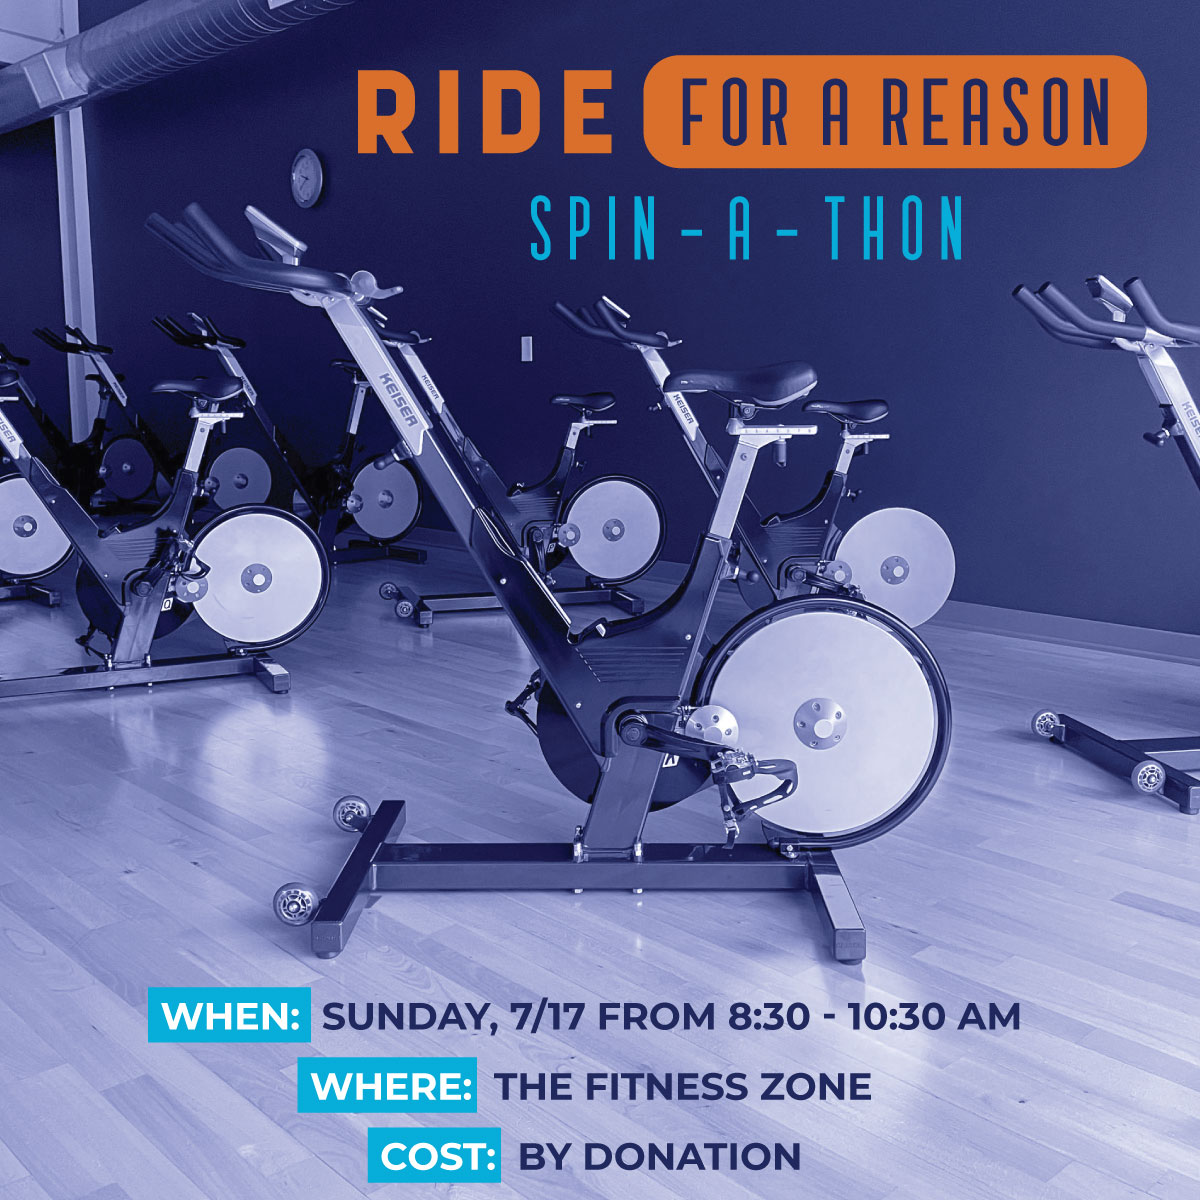 Riding For A Reason Spin-a-thon